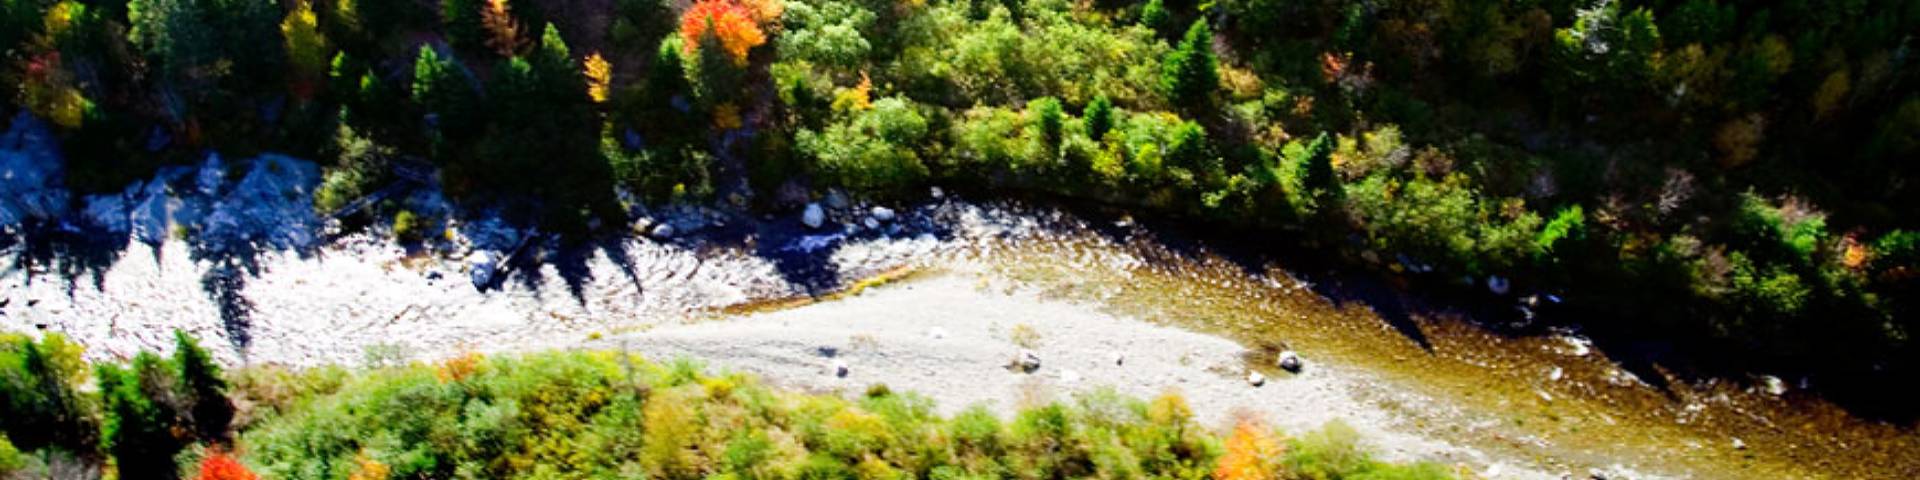 Bird's eye view of the Upper Salmon river